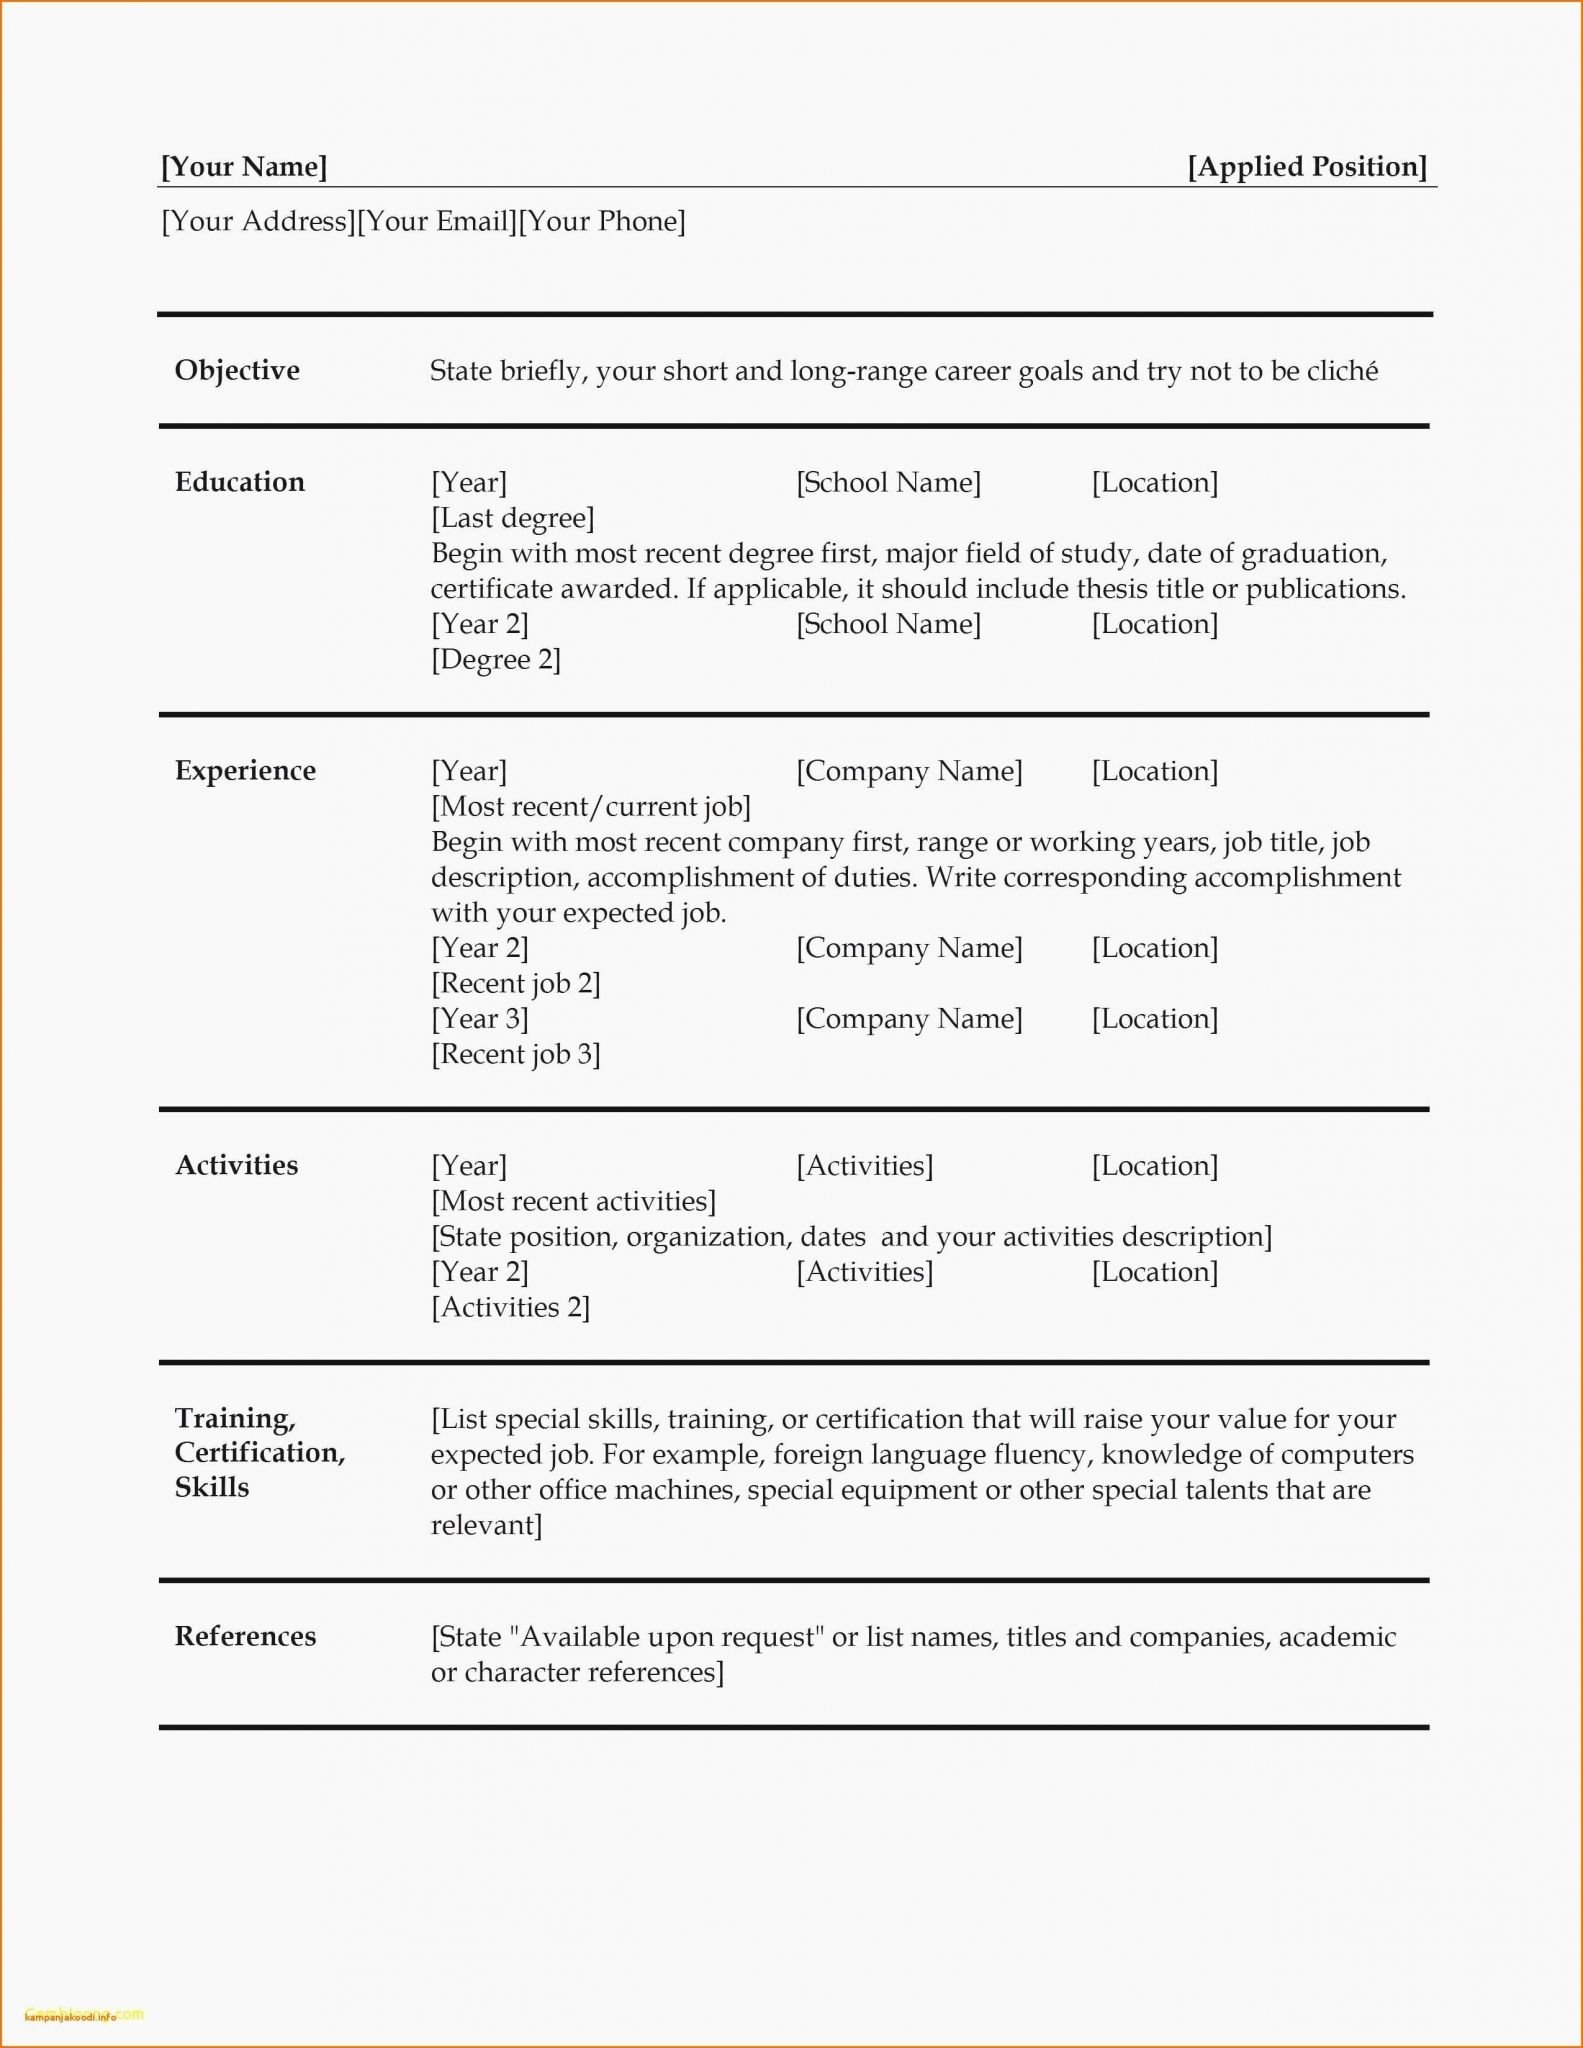 Person Centered Planning Worksheets  Briefencounters With Regard To Person Centered Planning Worksheets